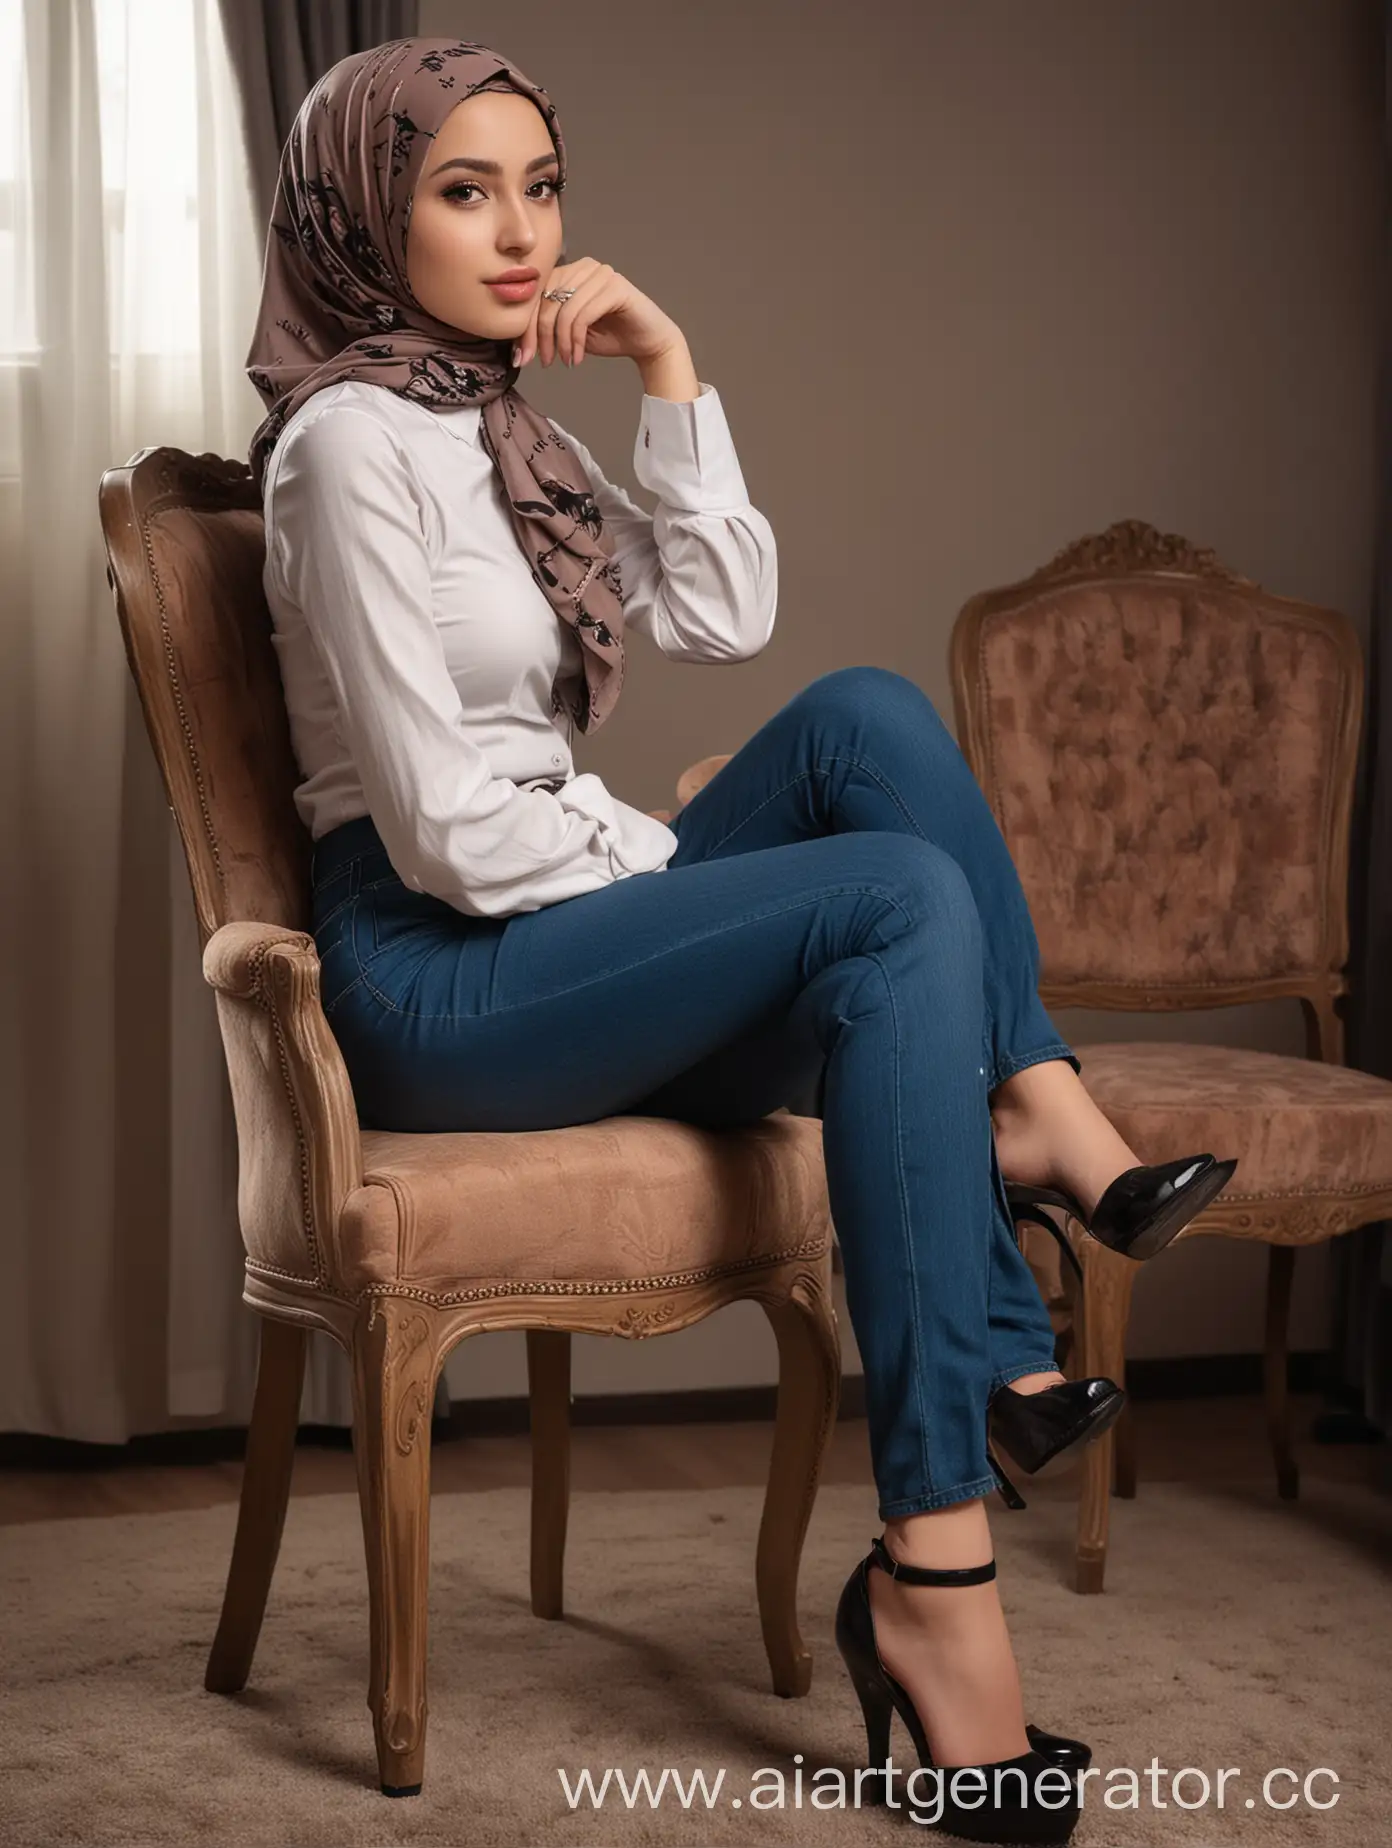 Fashionable-Hijabi-Woman-in-Elegant-Pose-with-Bell-Bottom-Jeans-and-High-Heels